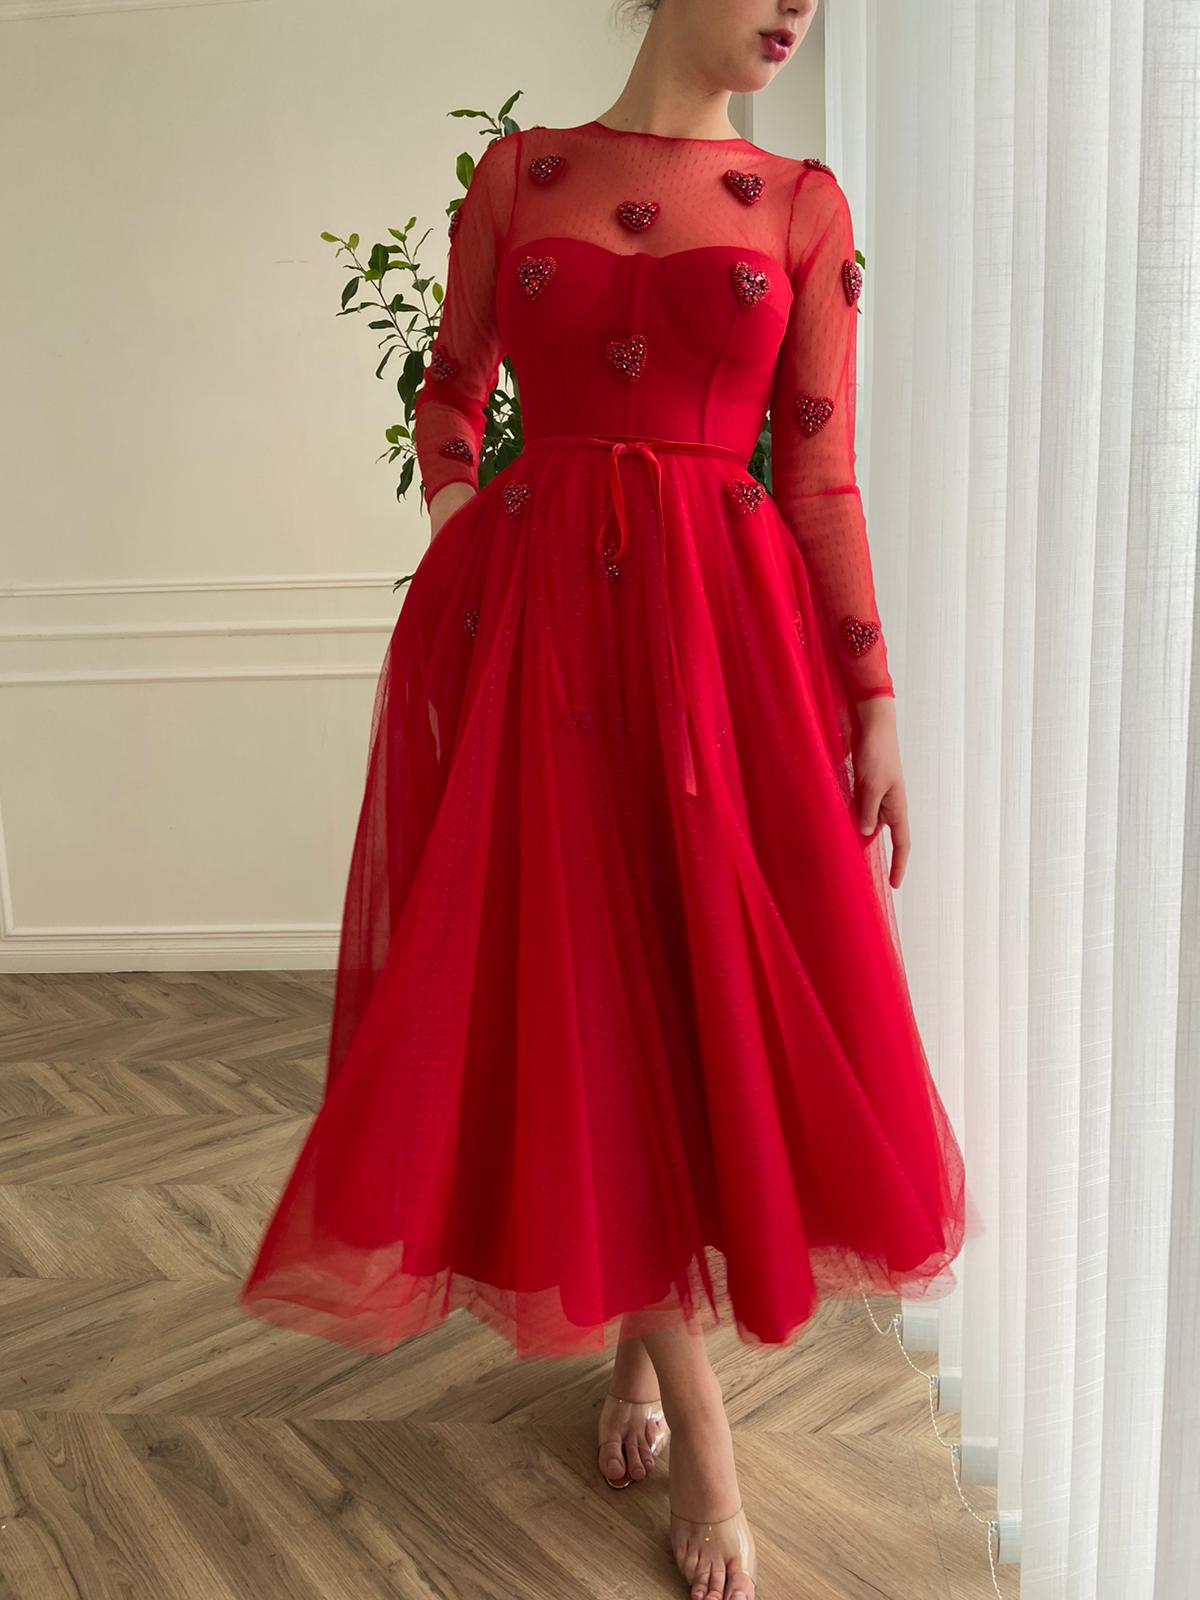 Red midi dress with embroidered hearts and long sleeves